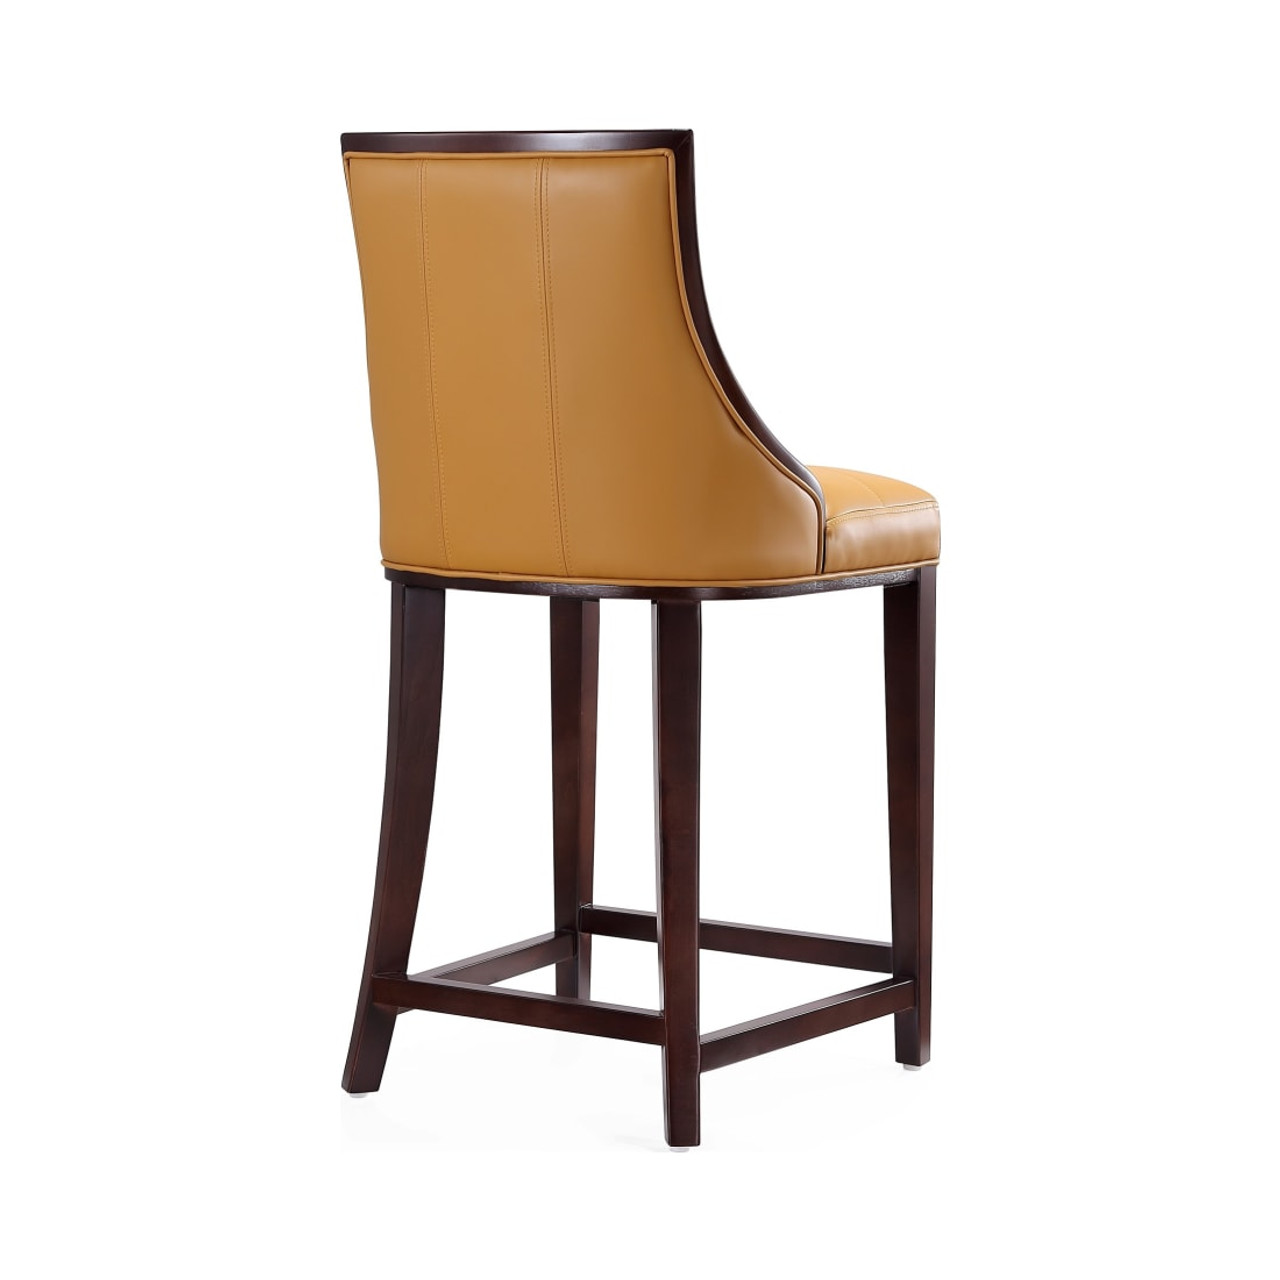 Fifth Ave Counter Stool in Camel and Dark Walnut (Set of 3)